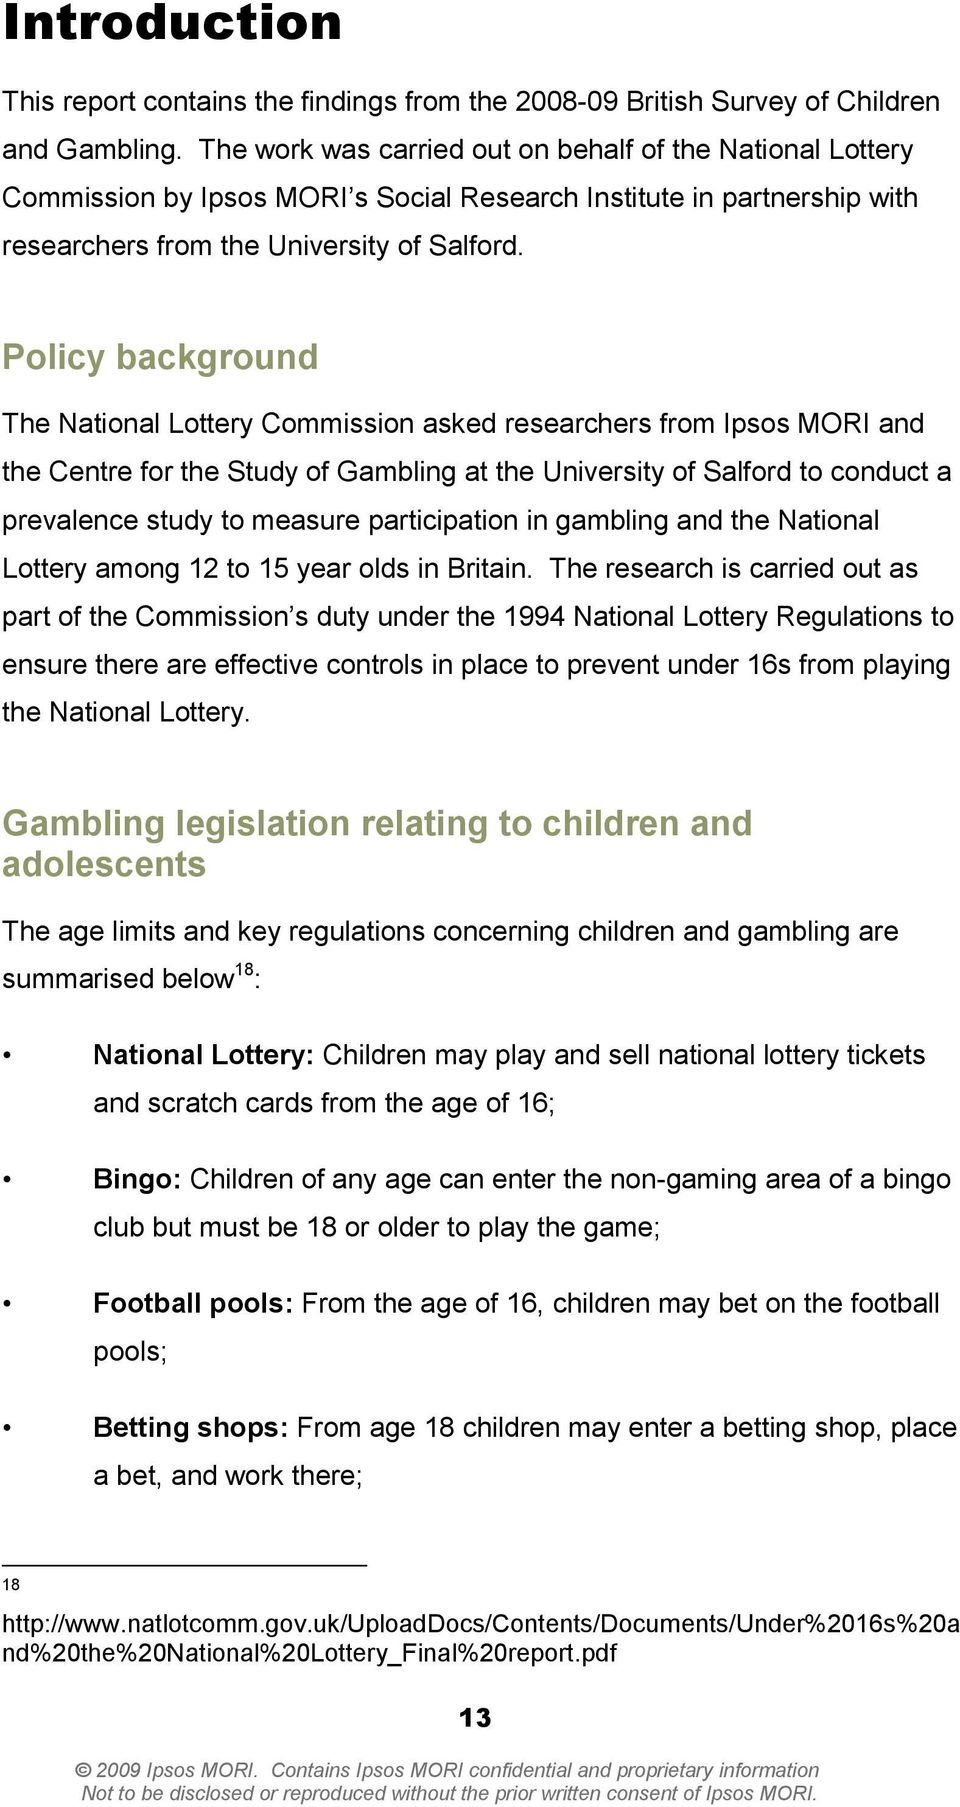 Policy background The National Lottery Commission asked researchers from Ipsos MORI and the Centre for the Study of Gambling at the University of Salford to conduct a prevalence study to measure